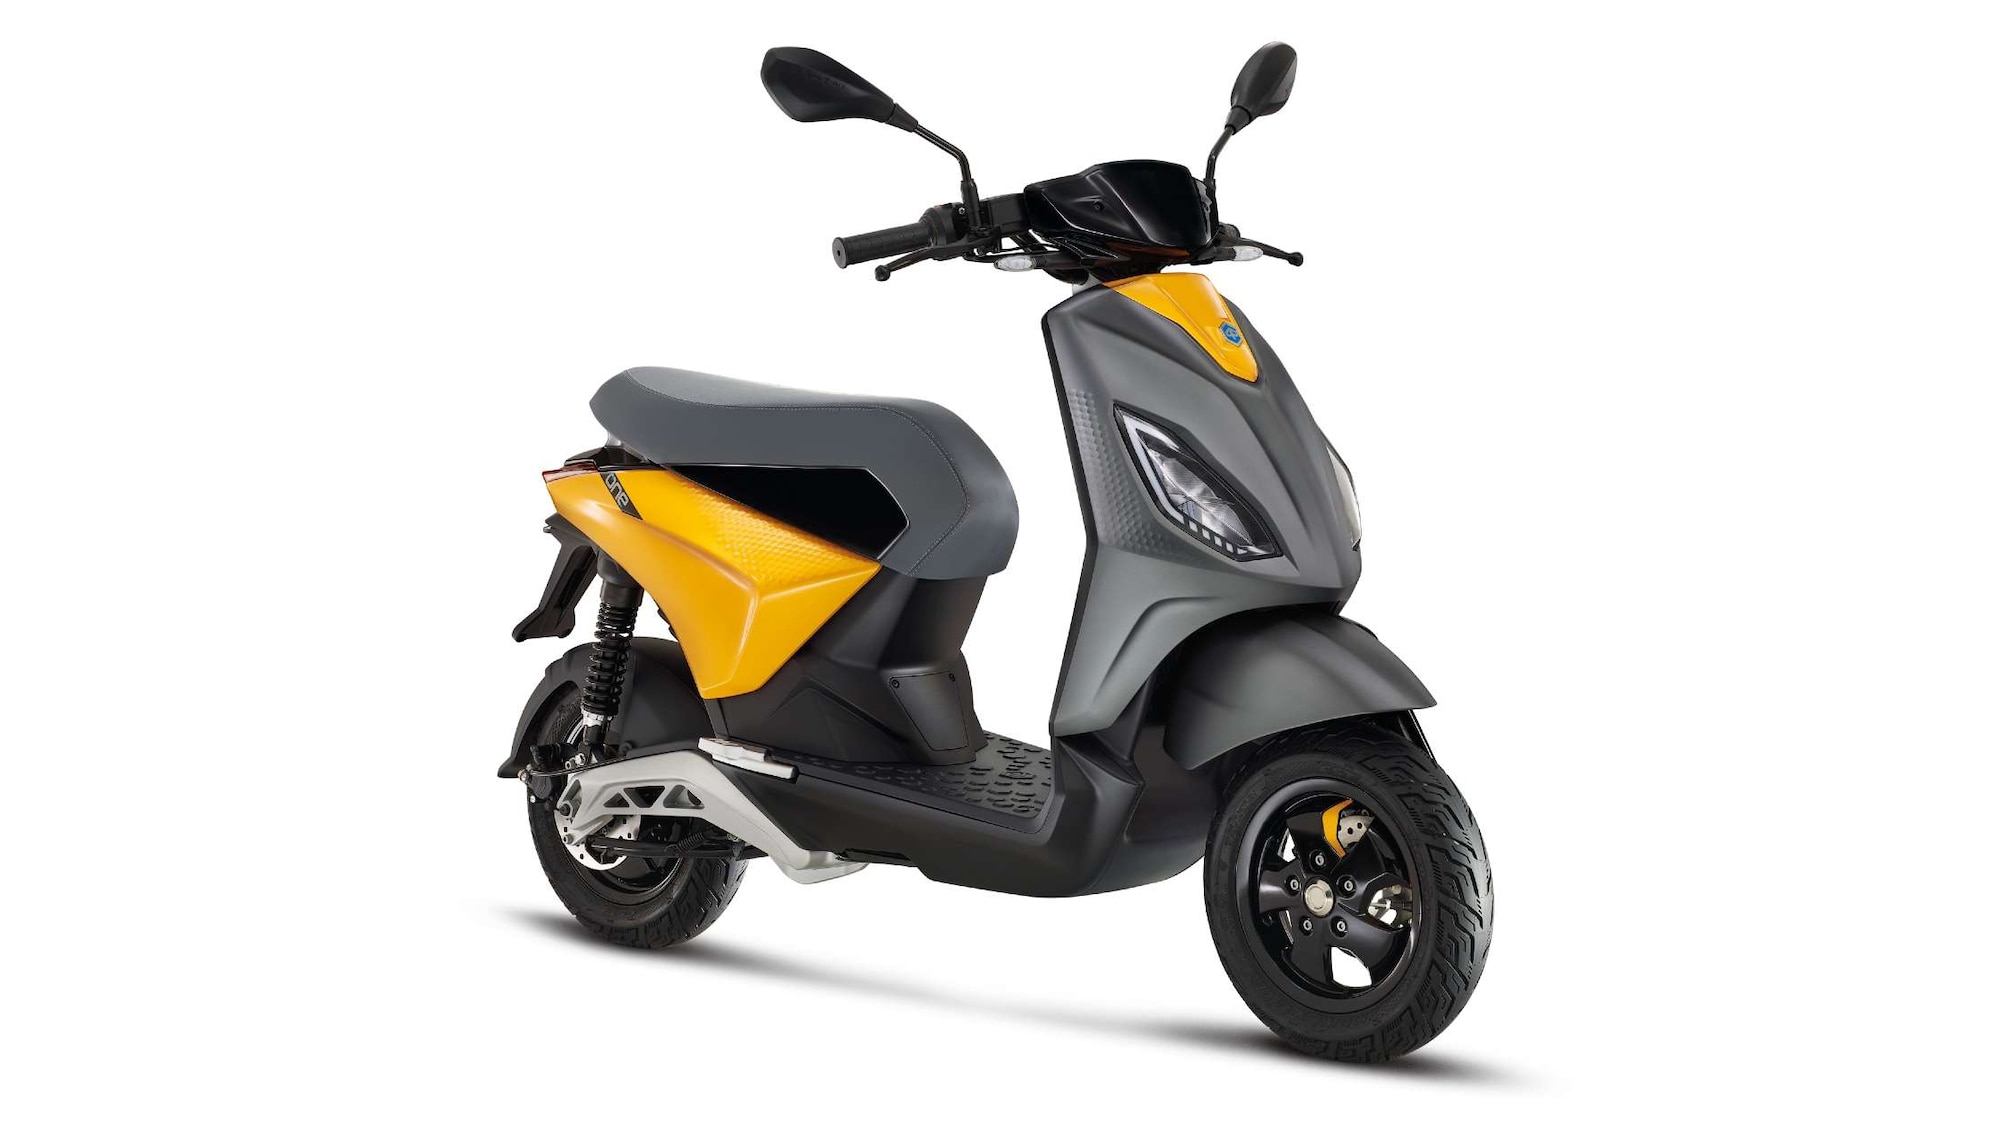 The Piaggio One features removable batteries. Image: Piaggio